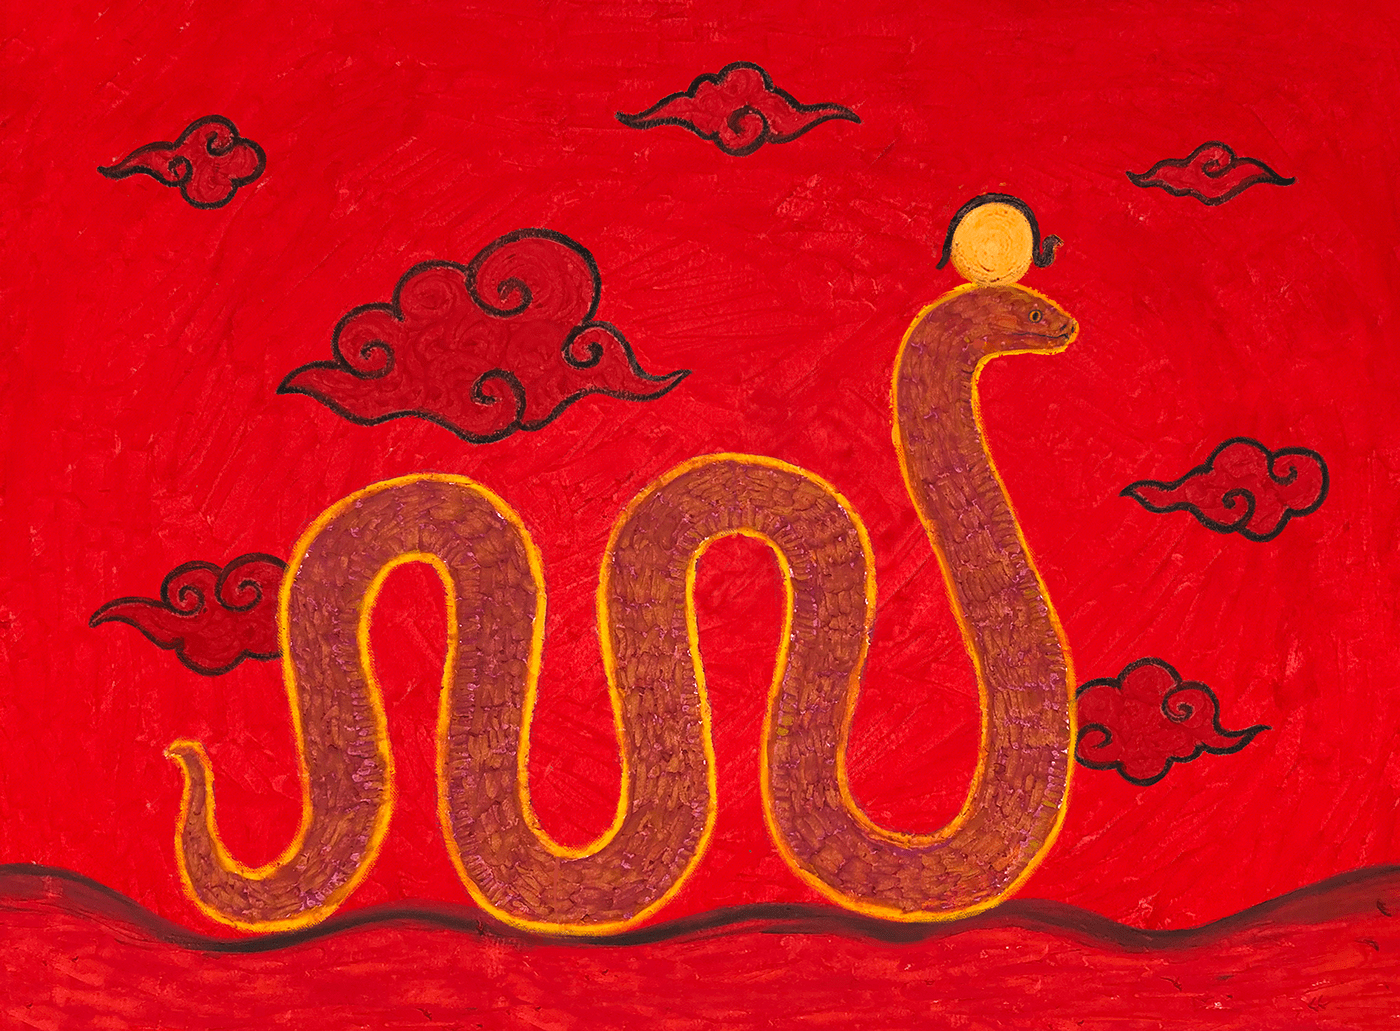 Snake in a red background.